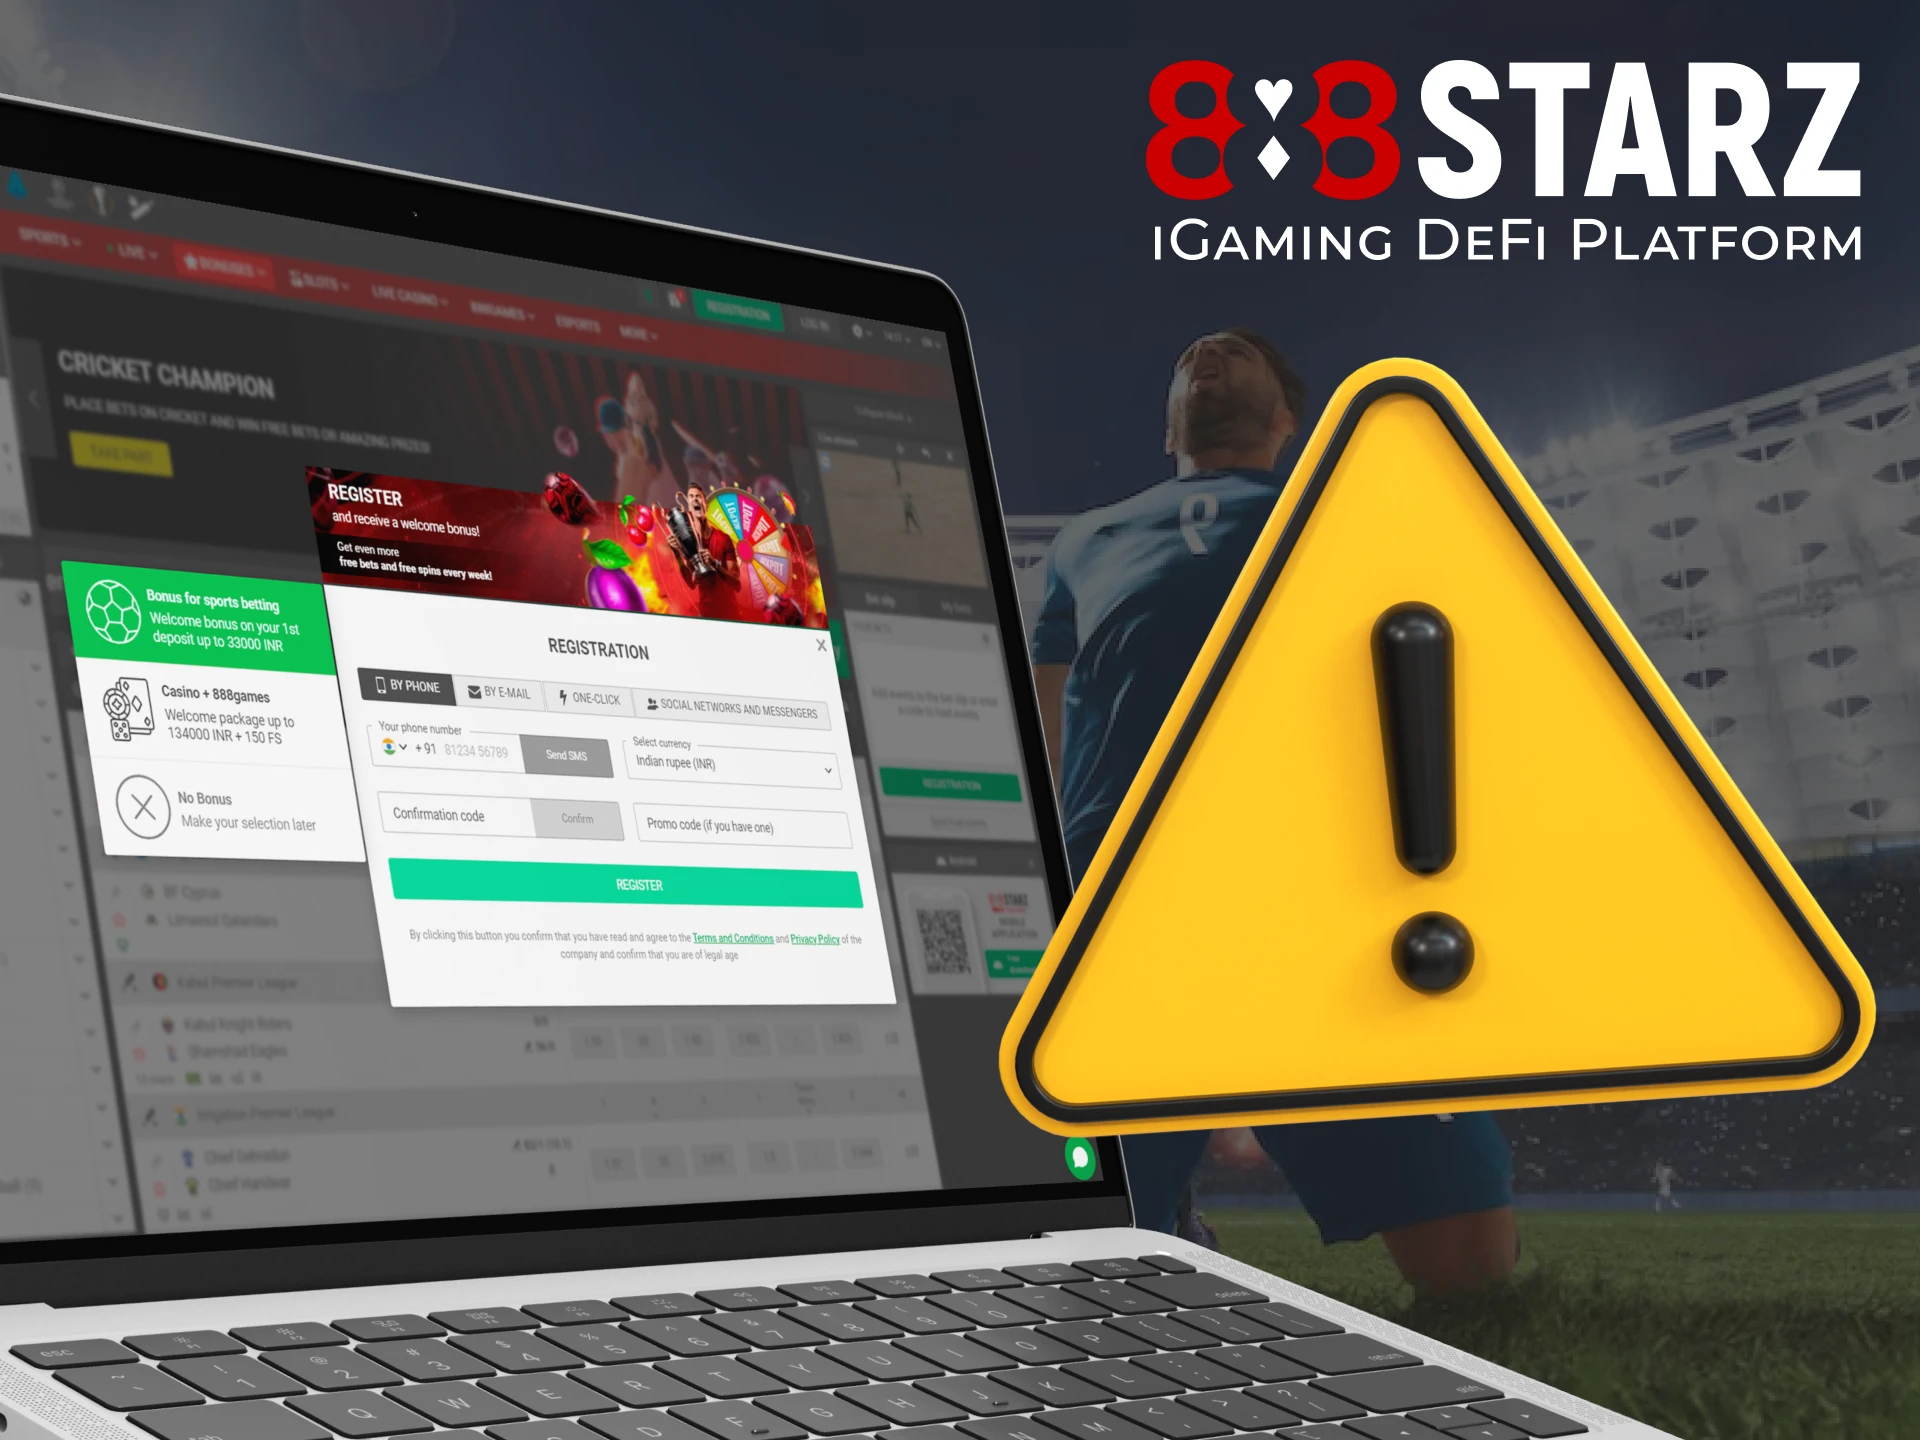 Read about common problems that may arise when creating an account with 888Starz.